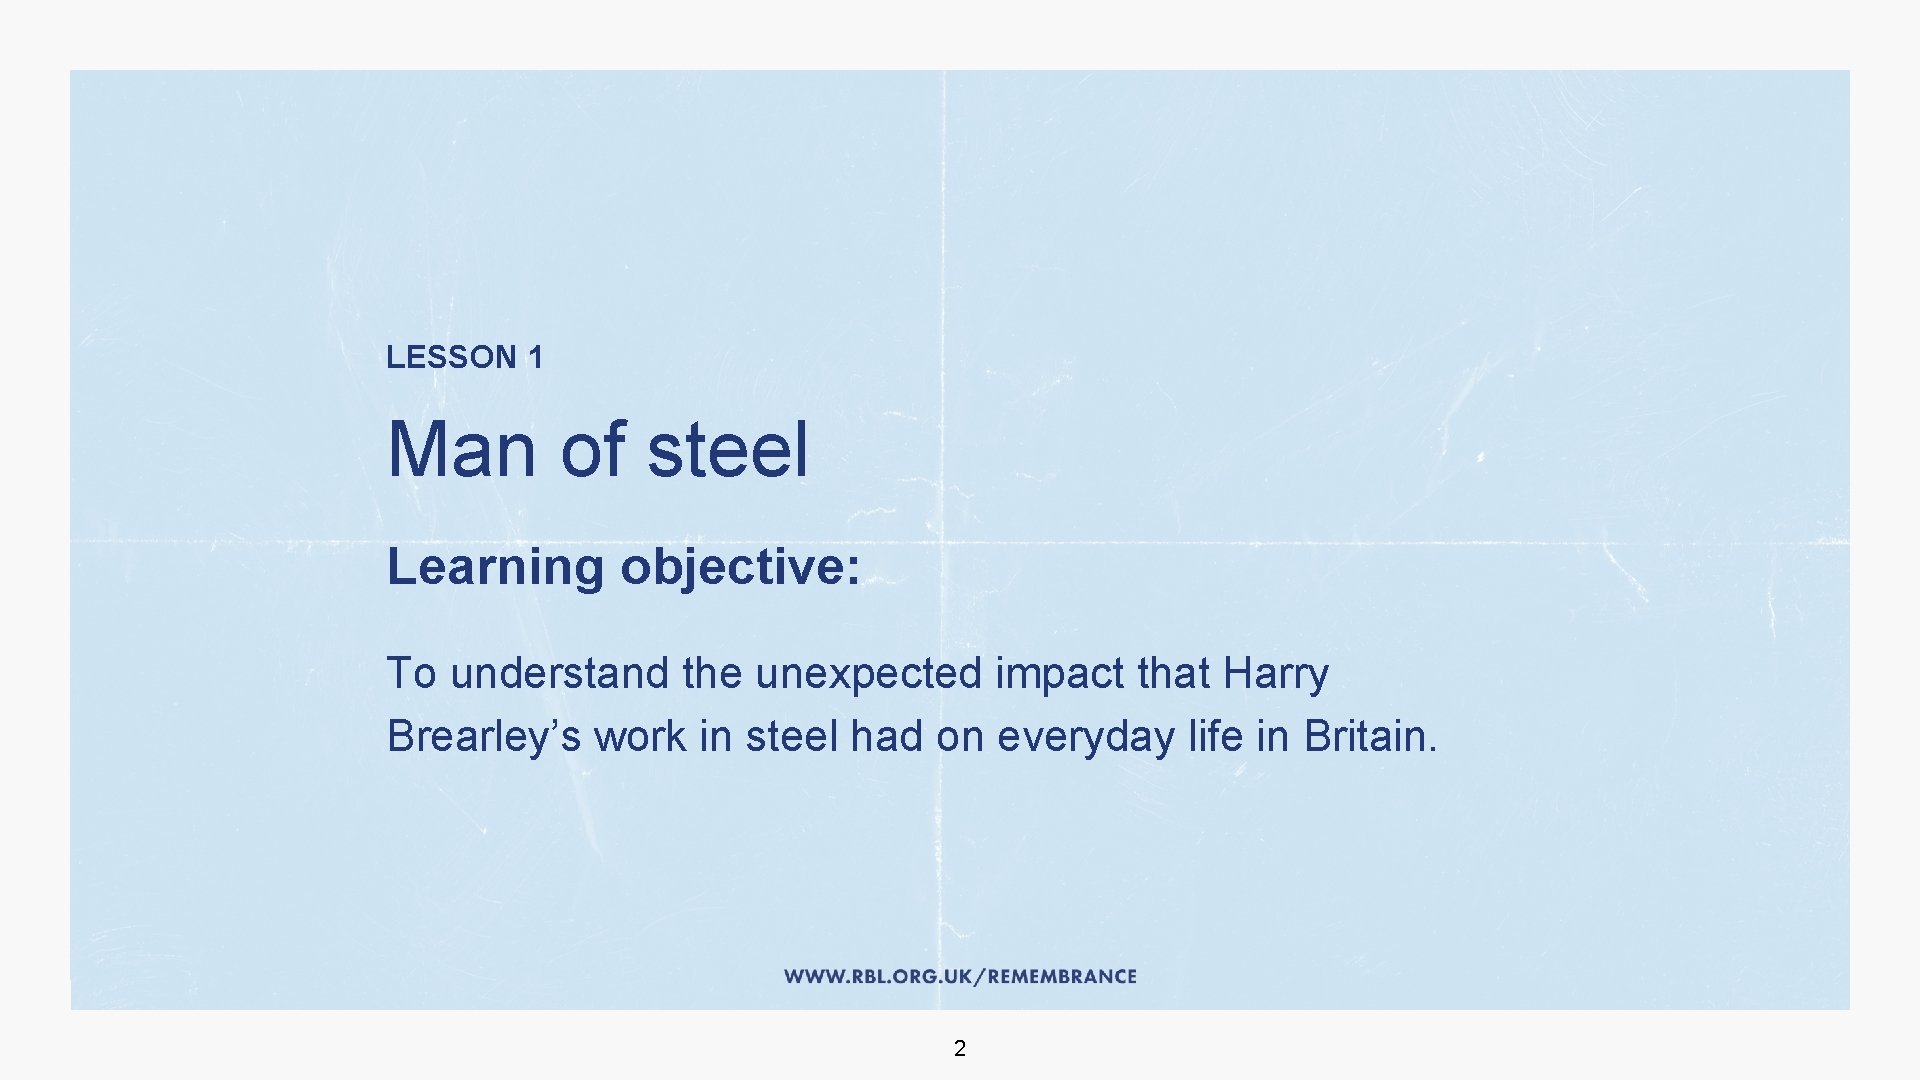 LESSON 1 Man of steel Learning objective: To understand the unexpected impact that Harry